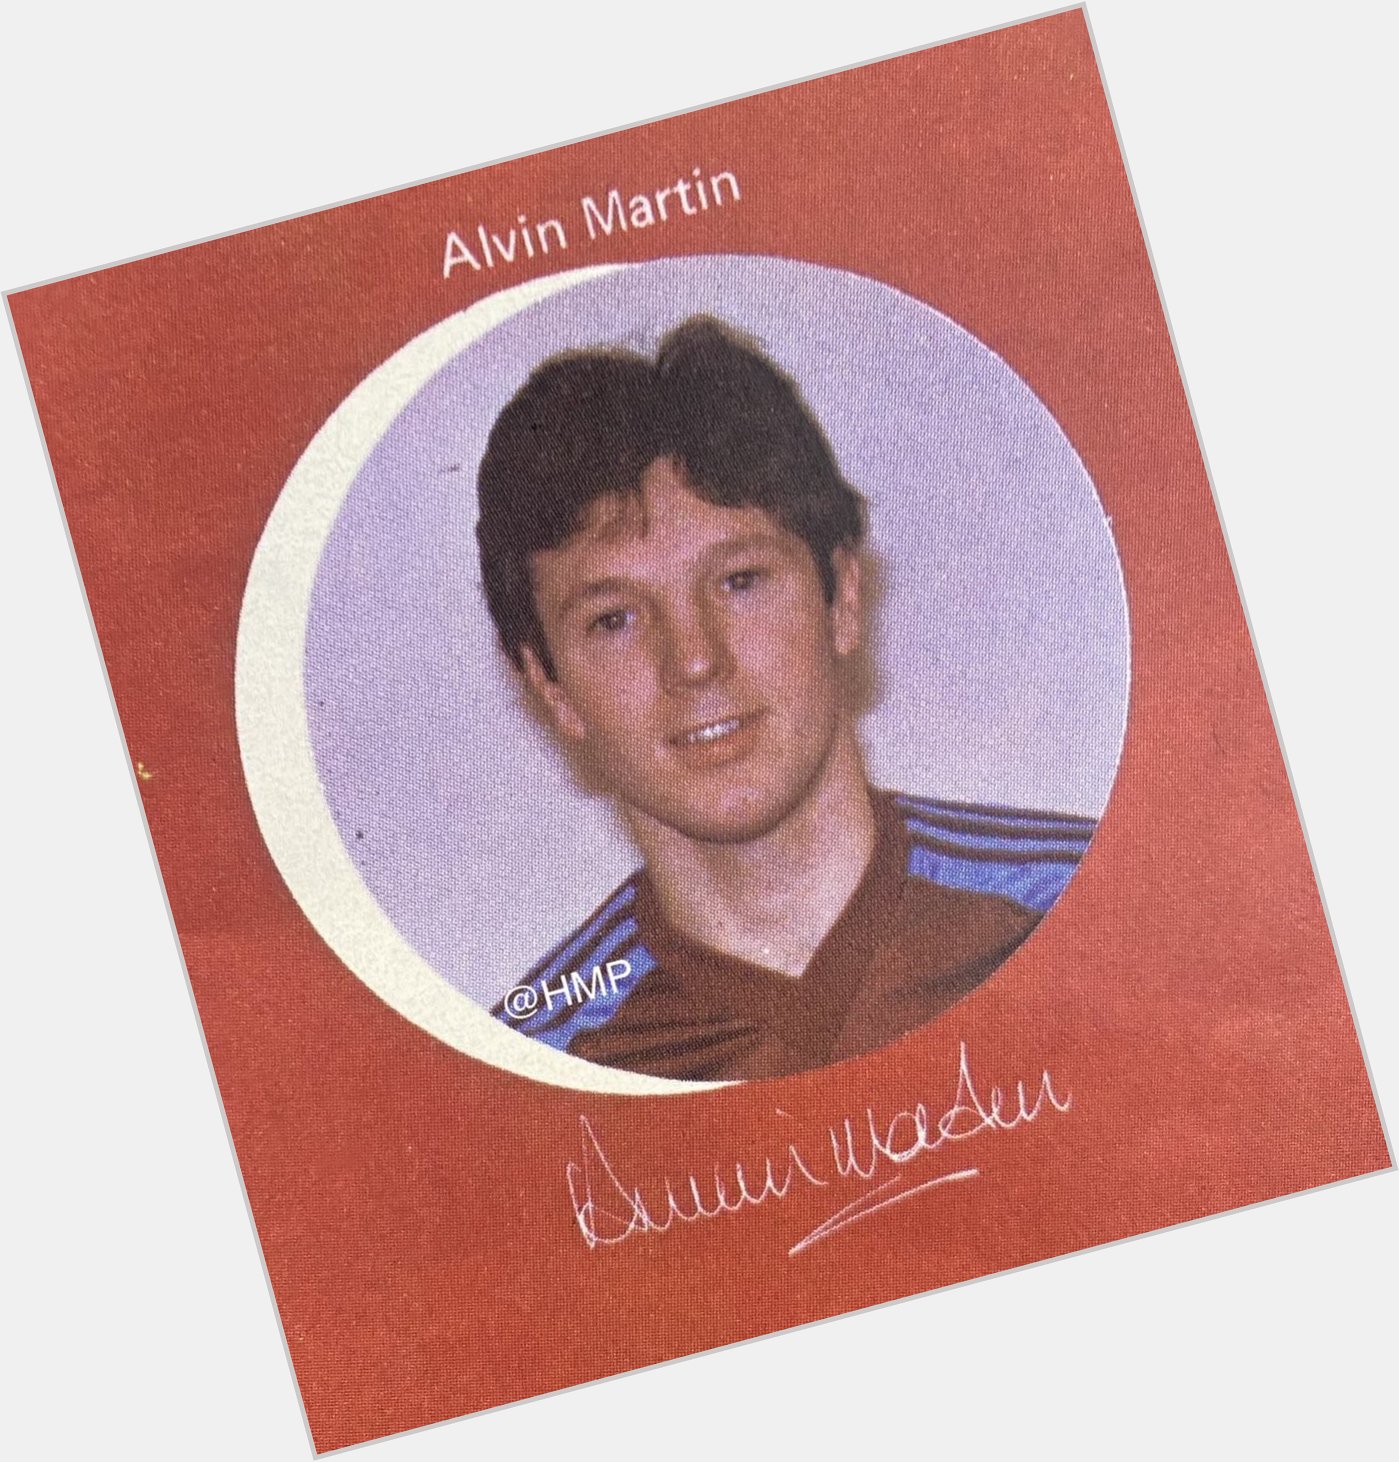 Happy 64th Birthday to legend Alvin Martin,many happy returns,hope u have a great day!         